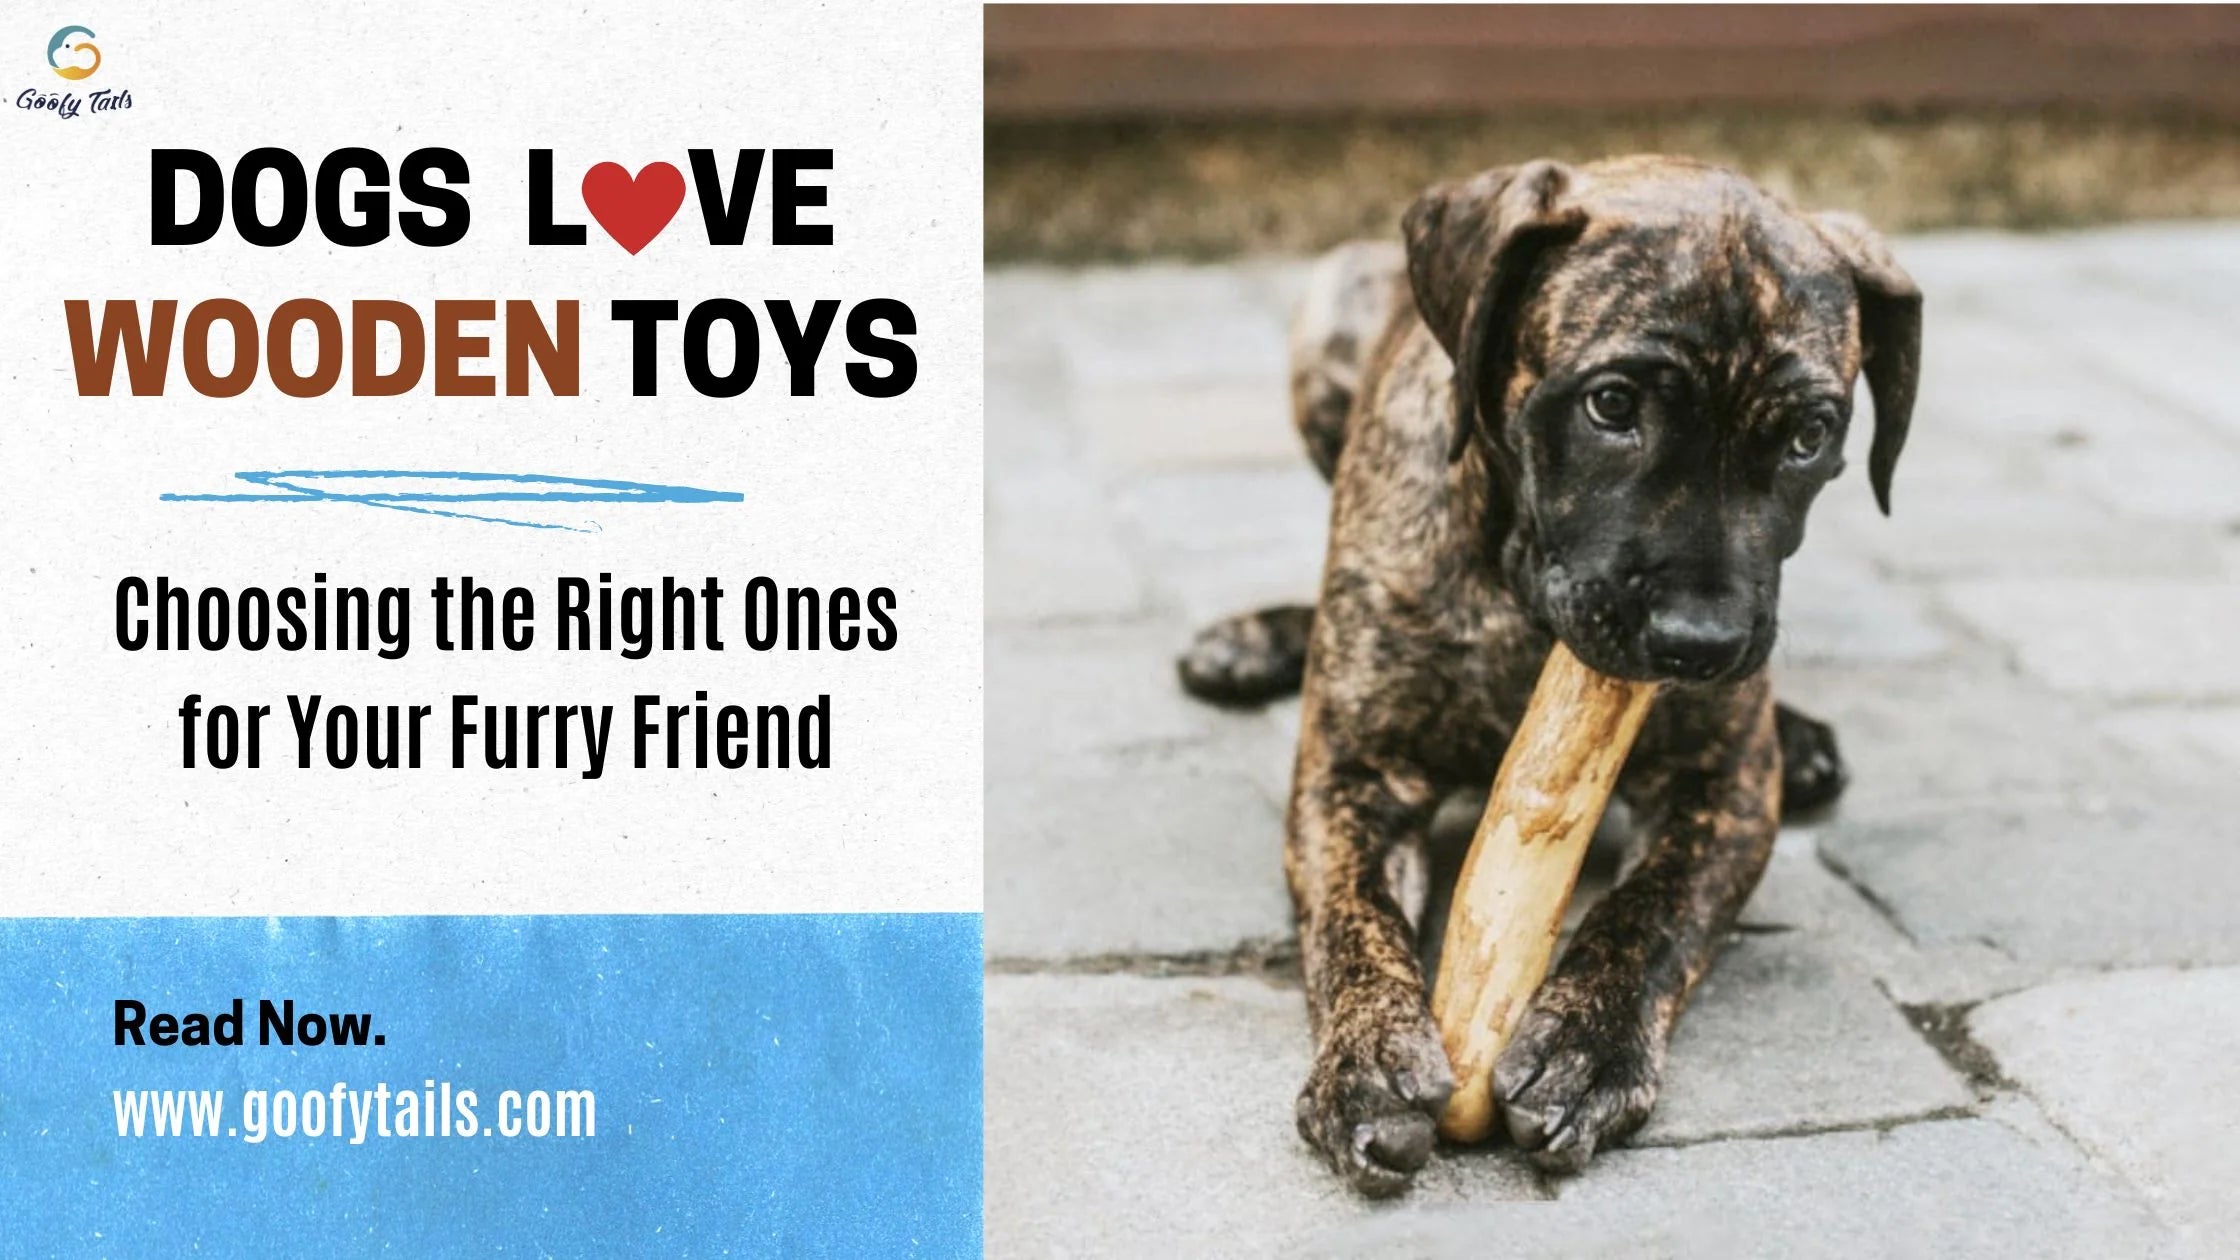 Dogs Love Wooden Toys: Choosing the Right Ones for Your Furry Friend